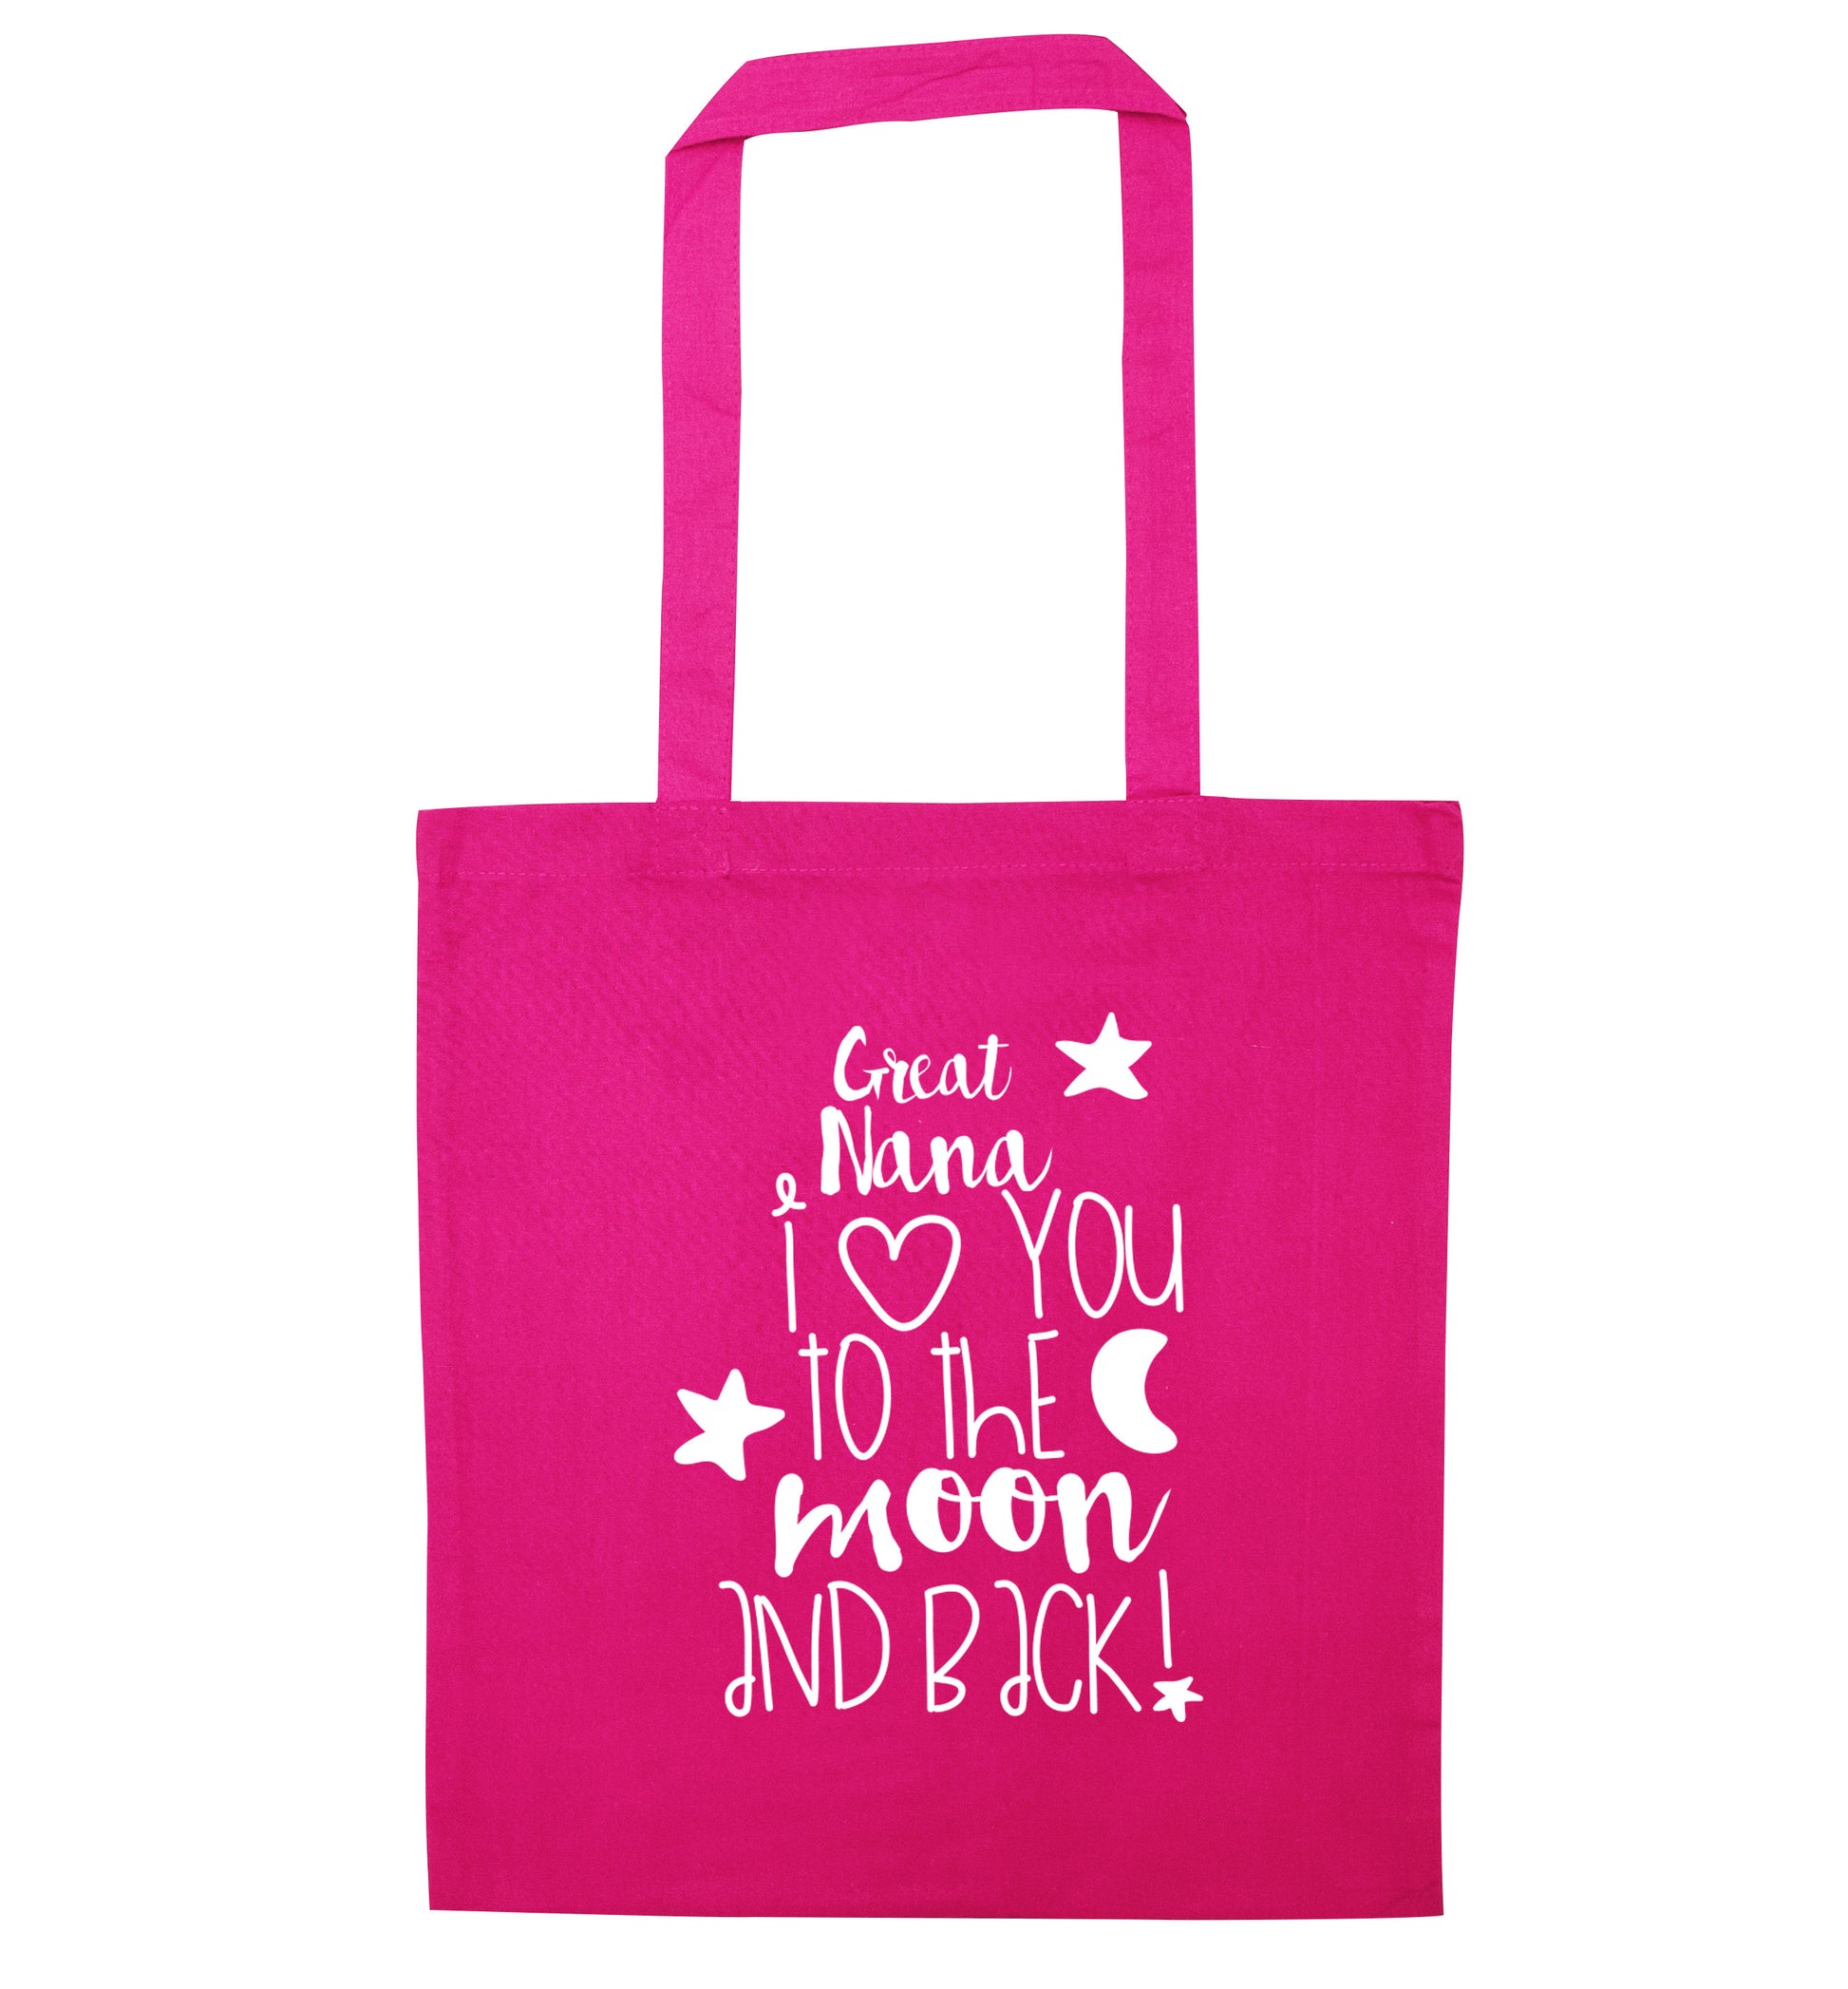 Great Nana I love you to the moon and back pink tote bag